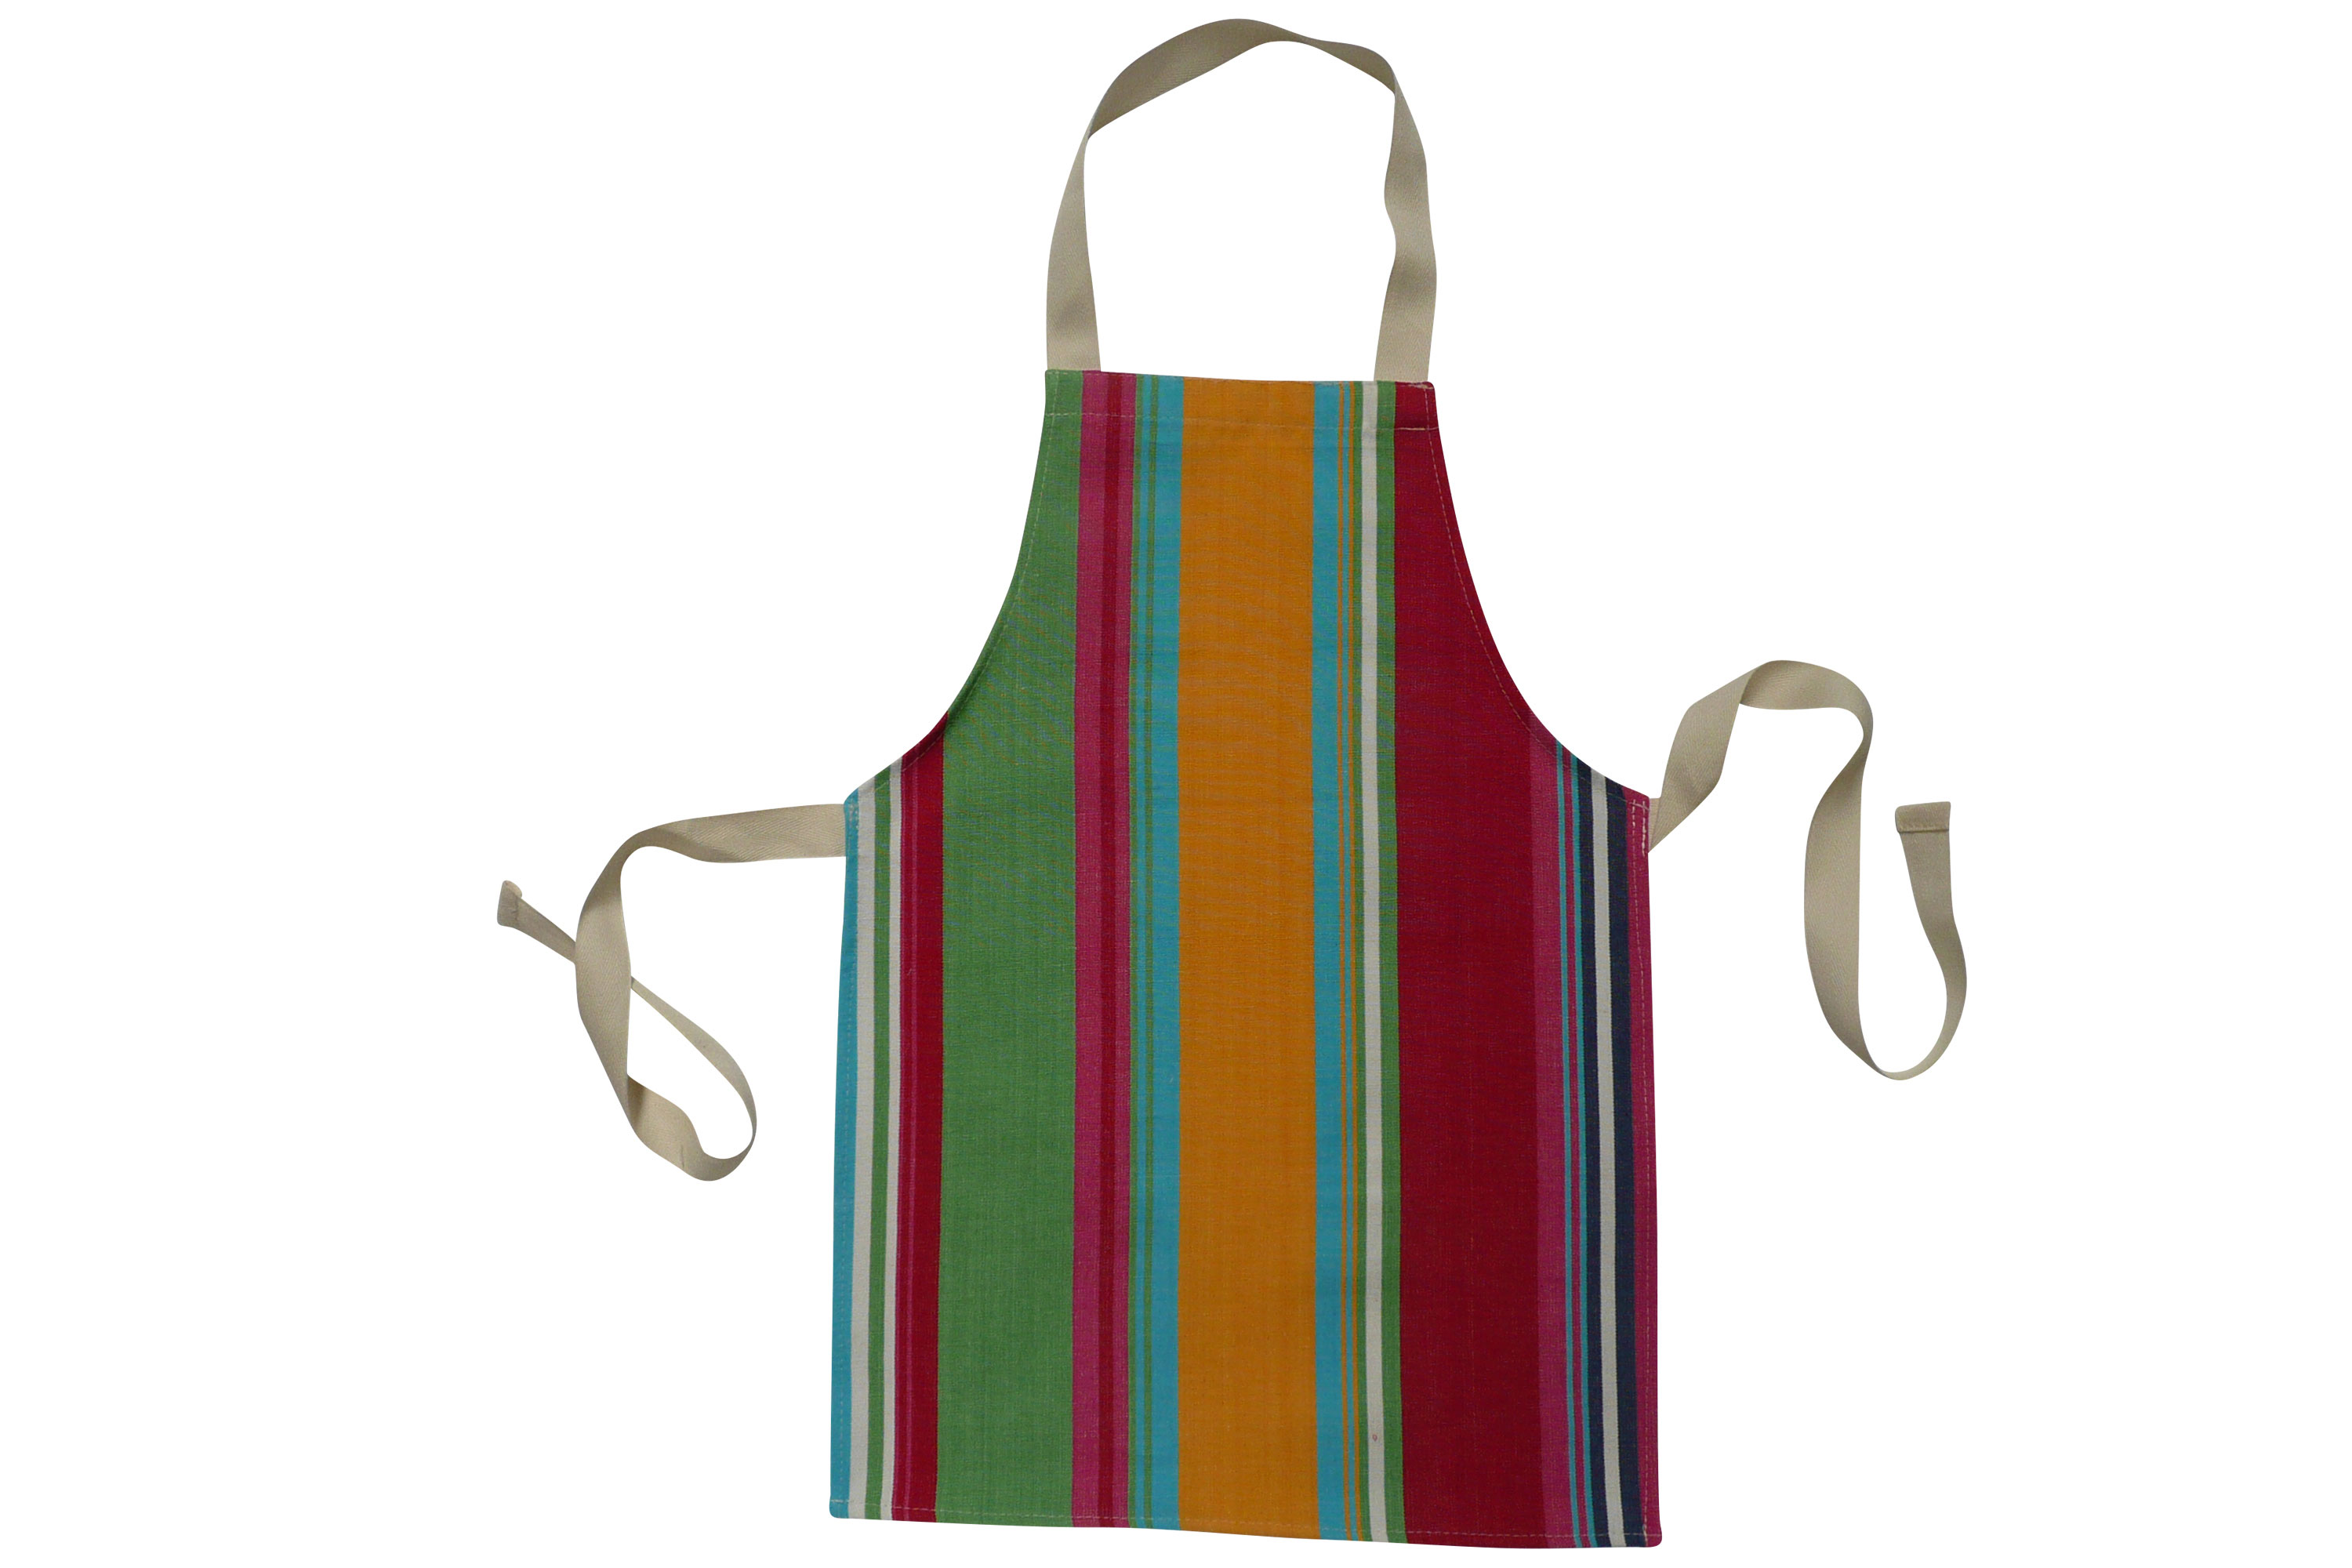 Pink Toddlers Aprons - Striped Aprons For Small Children Pink  Green  Yellow  Stripes